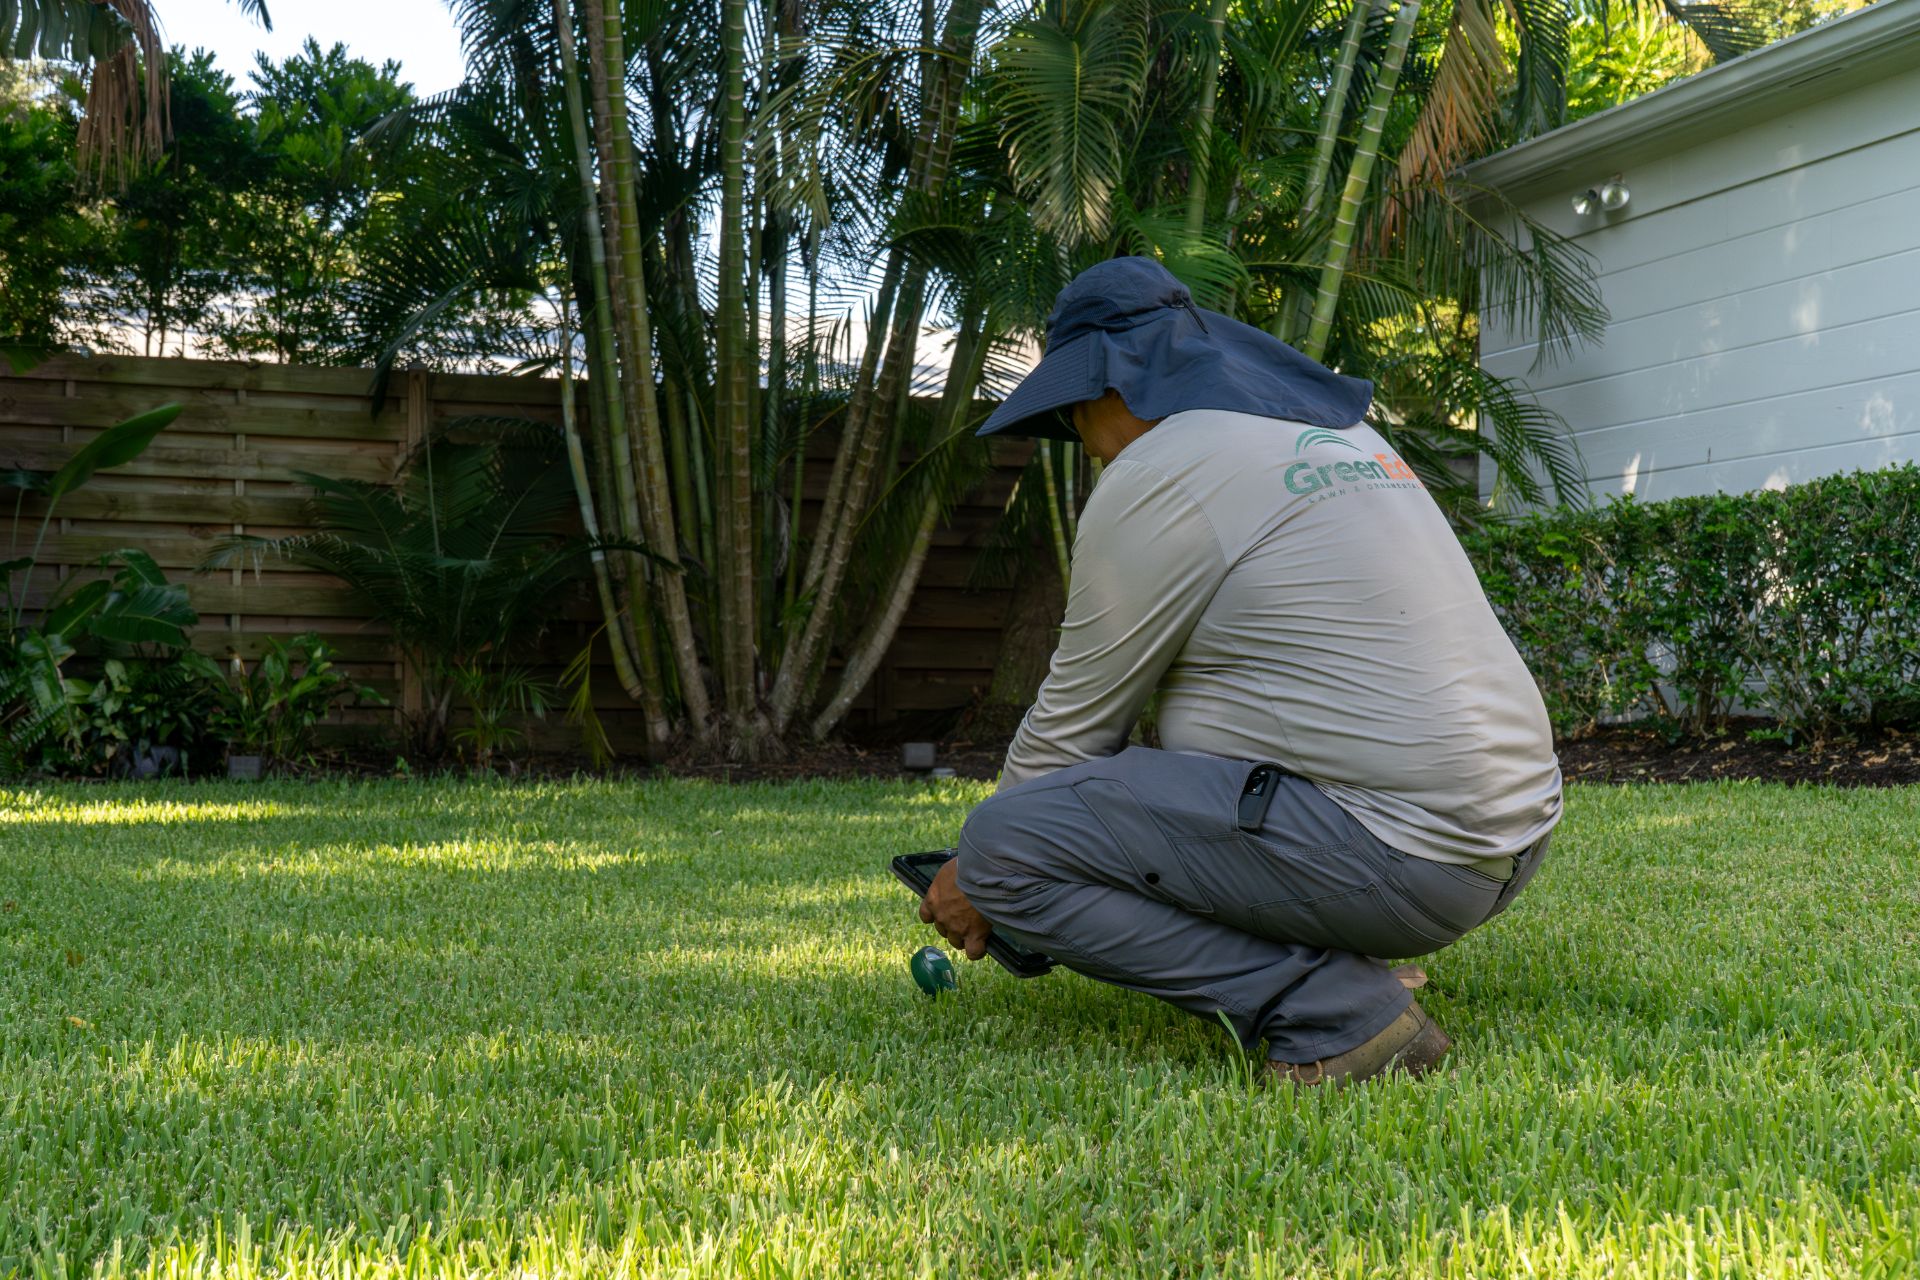 A GreenEdge staff member diligently assessing the health of the grass and taking notes in Sarasota. Our team carefully examines the condition of the grass, noting any issues or concerns for appropriate treatment and care. Trust GreenEdge for expert grass health evaluations and personalized strategies to promote a lush and vibrant lawn.